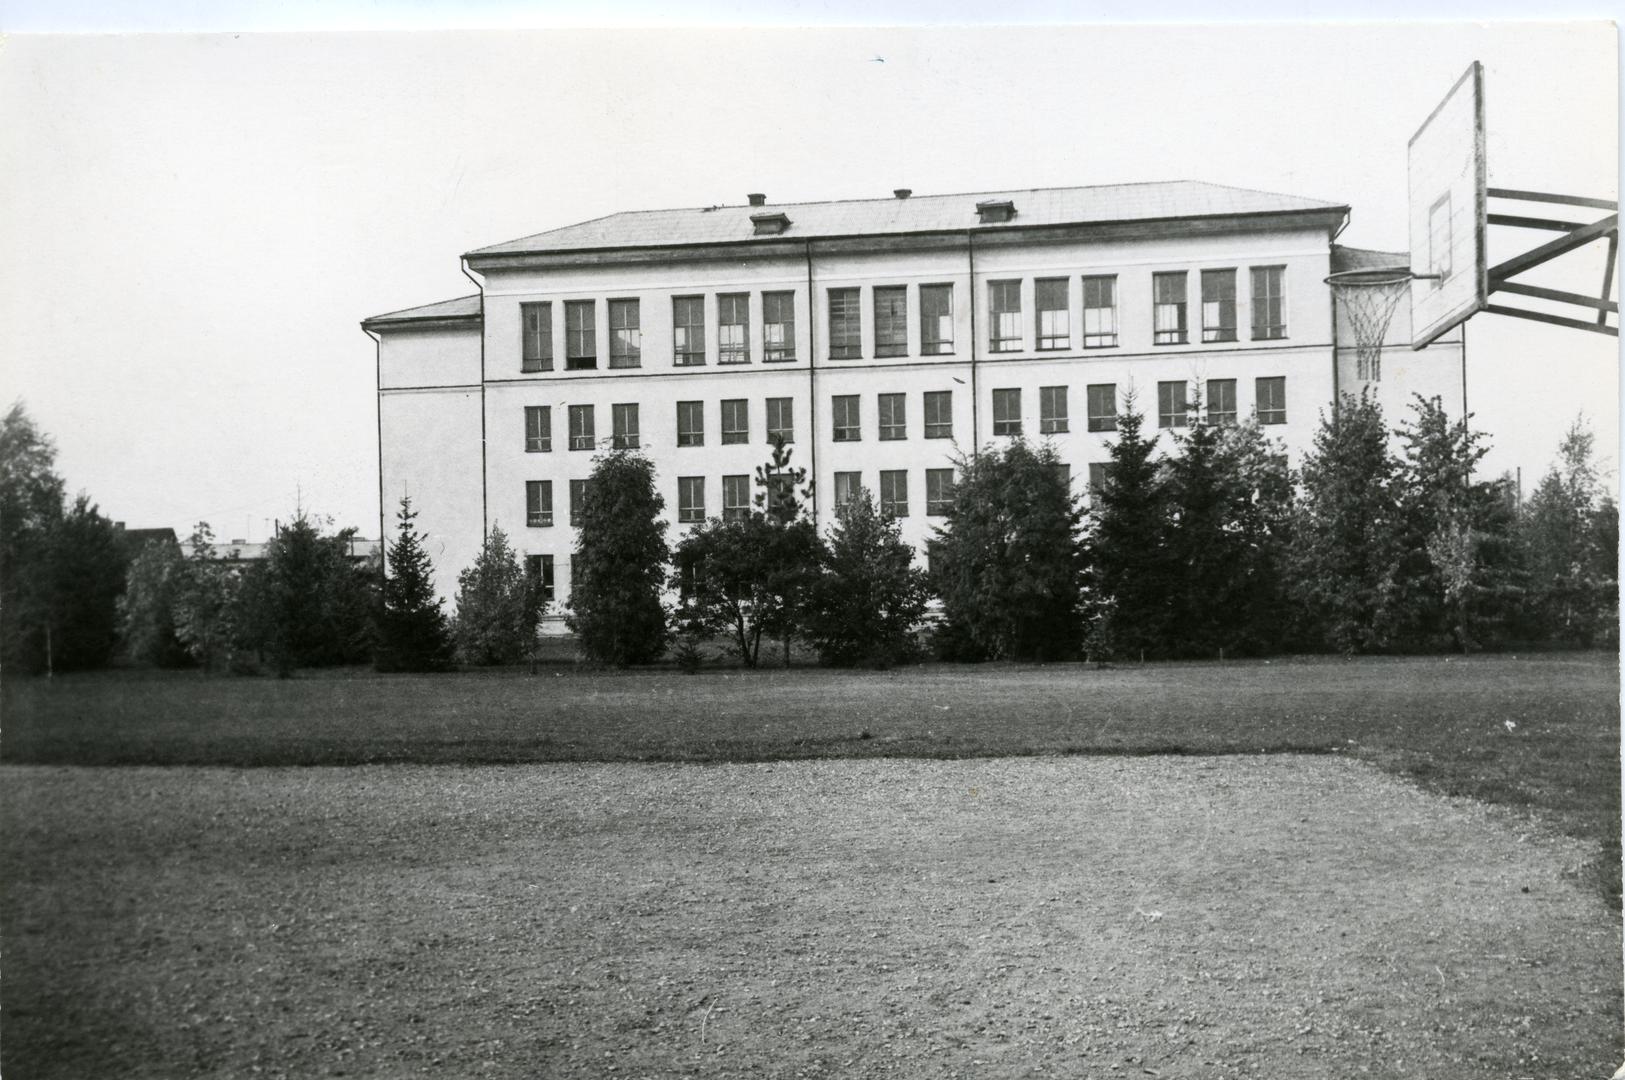 Räpina High School buildings and gardens